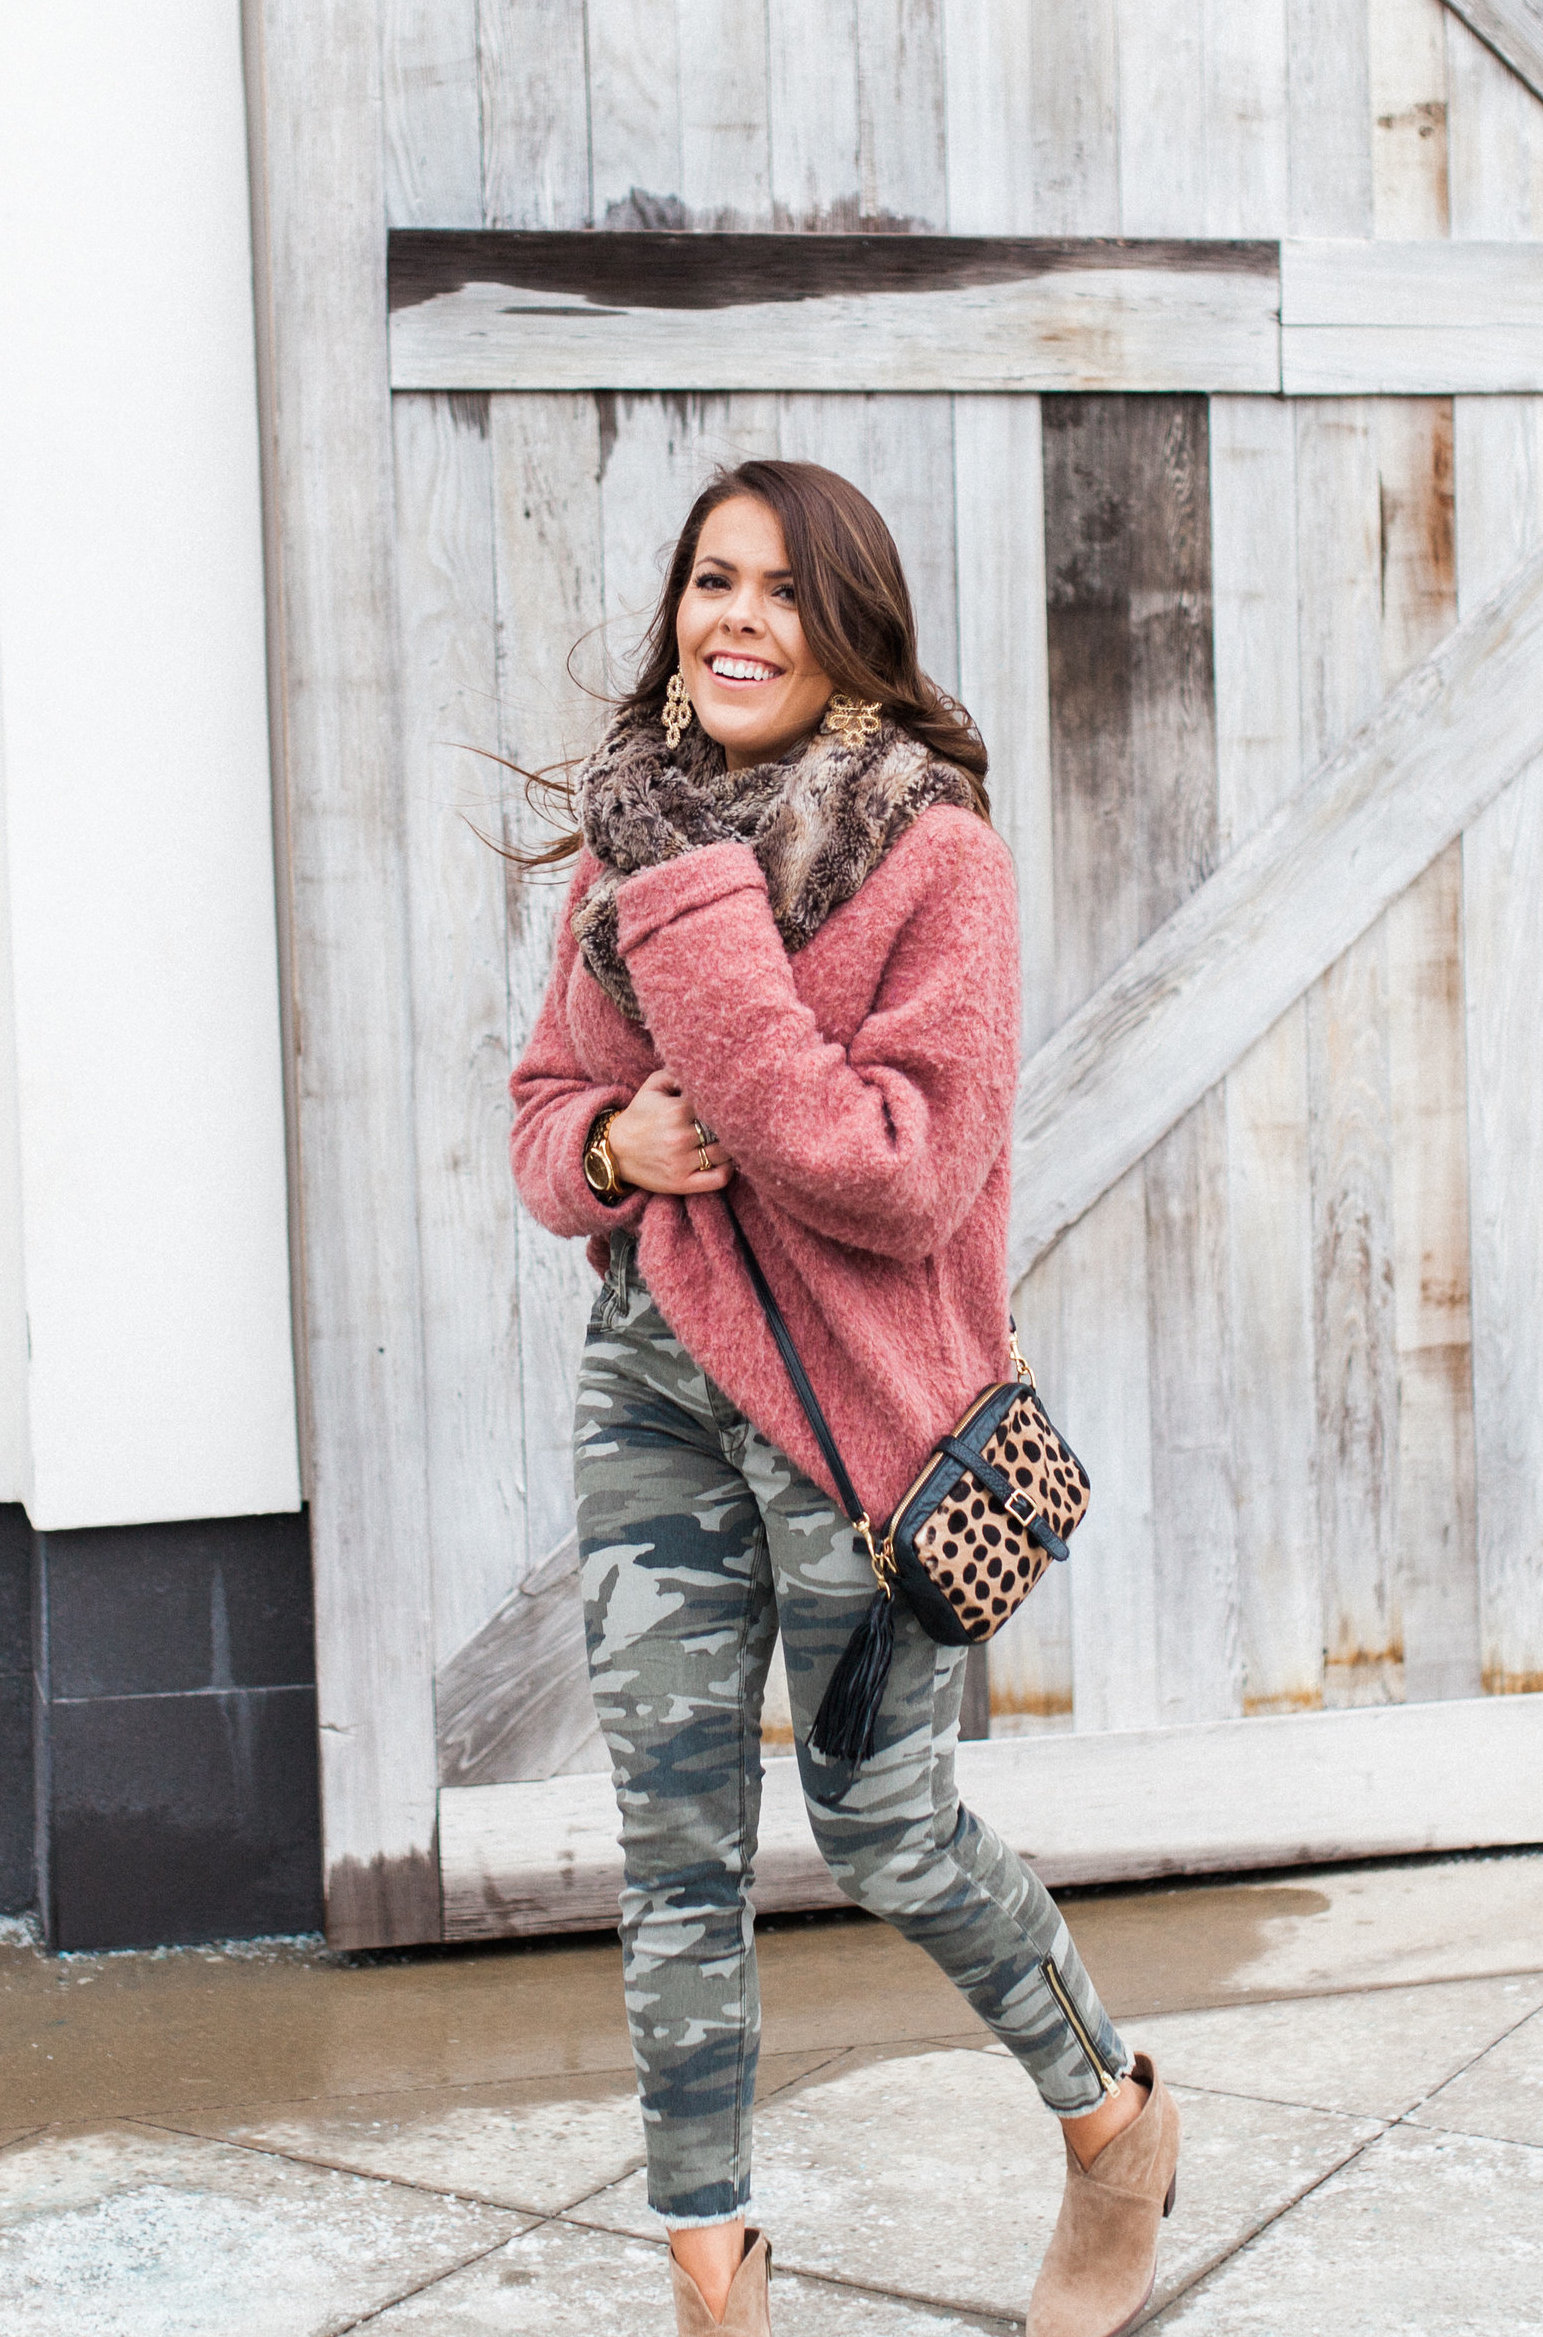 Another way to style camo pants/ cozy way to wear camo pants 